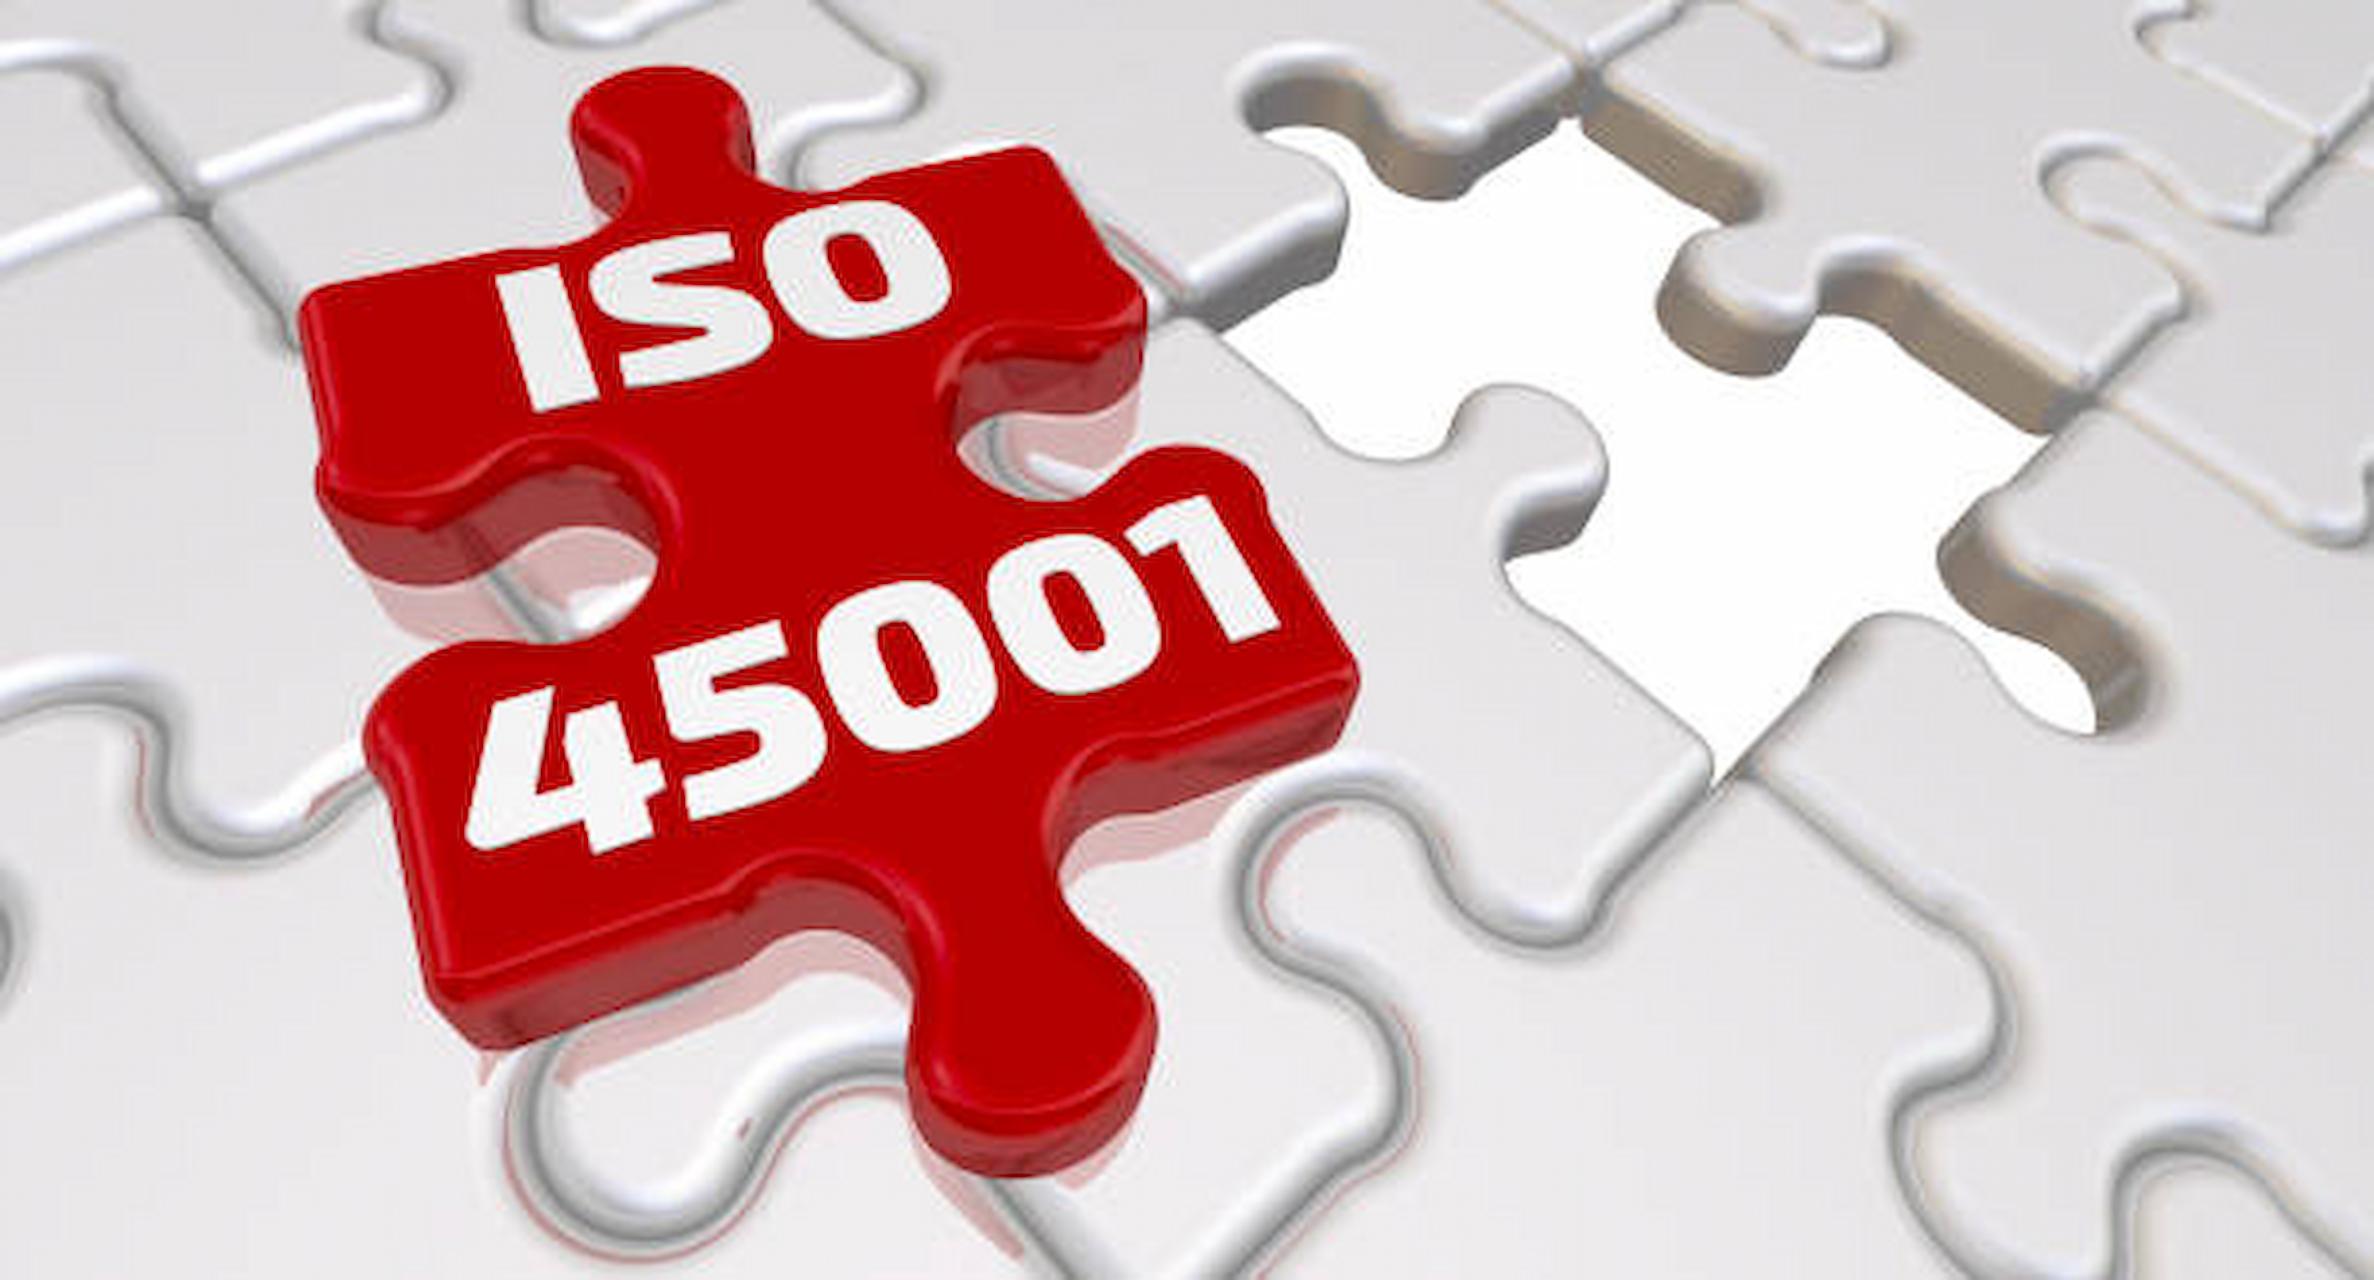 What Are The Benefits Of Iso 45001?